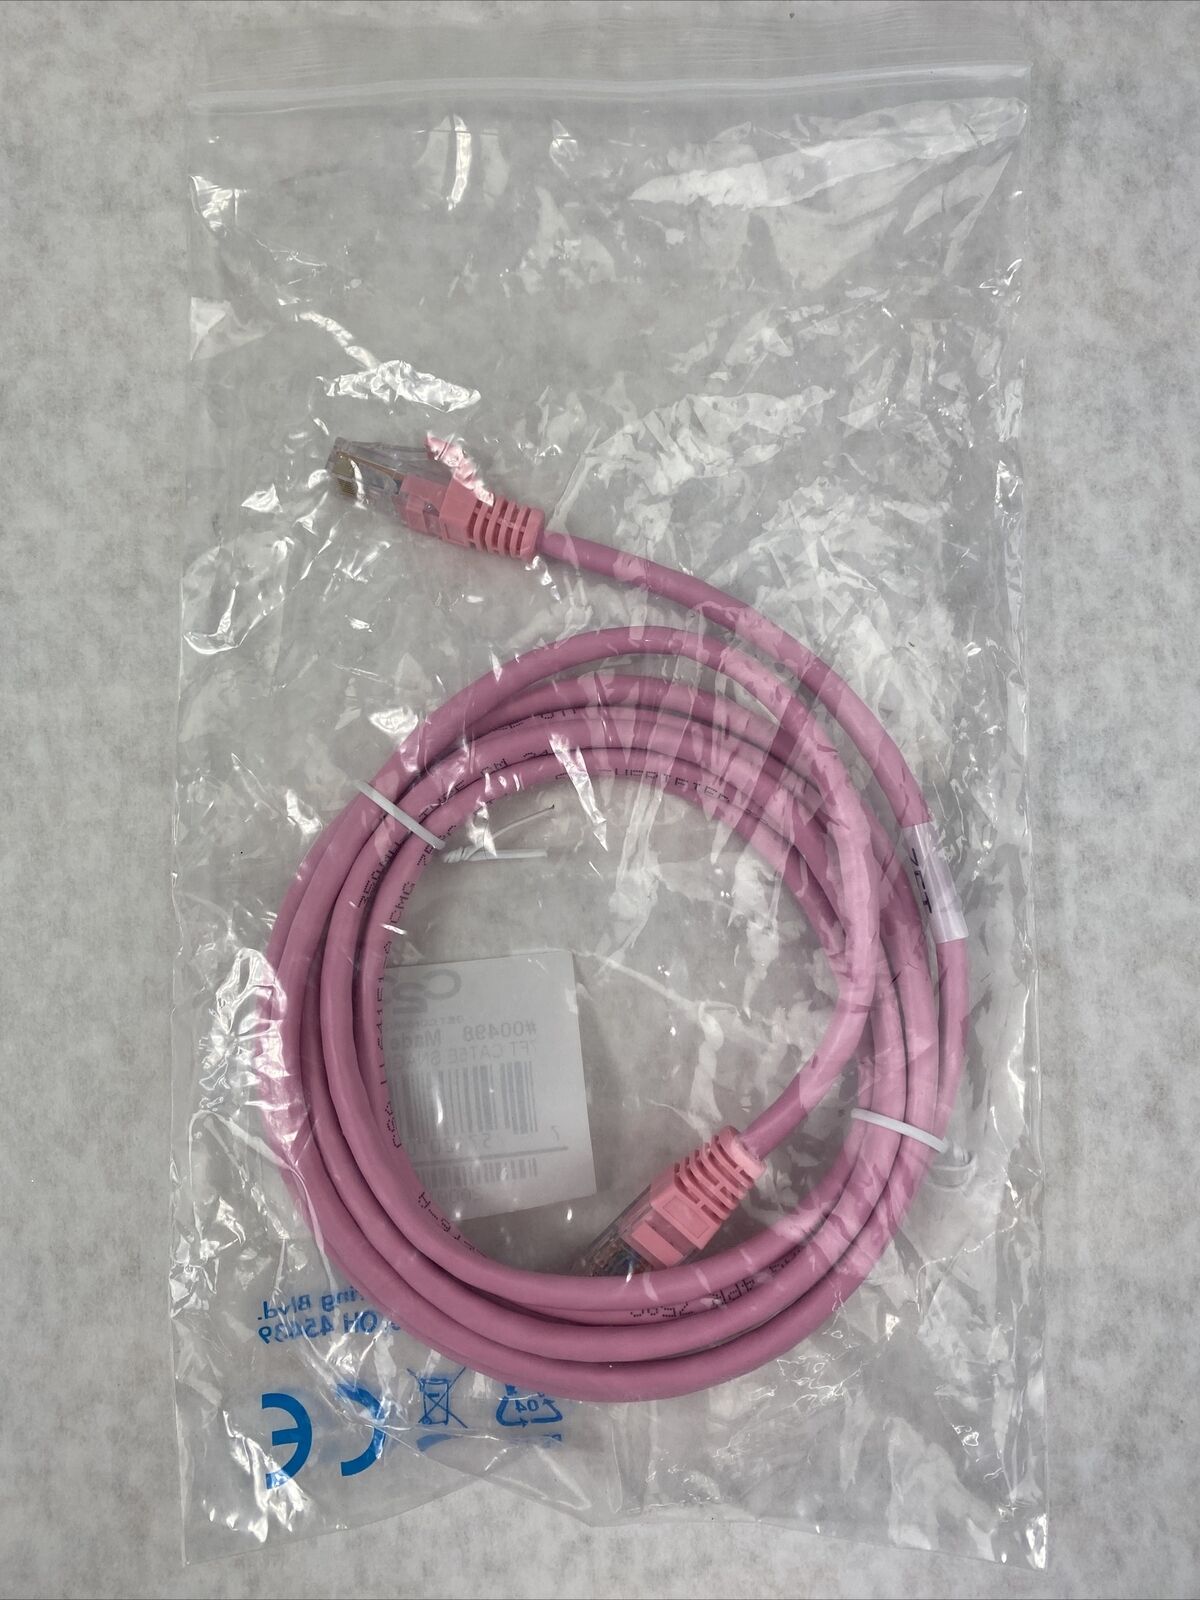 Lot( 3 ) 7ft Pink Cat5e C2G 00498 Snagless Unshielded UTP Ethernet Patch Cable